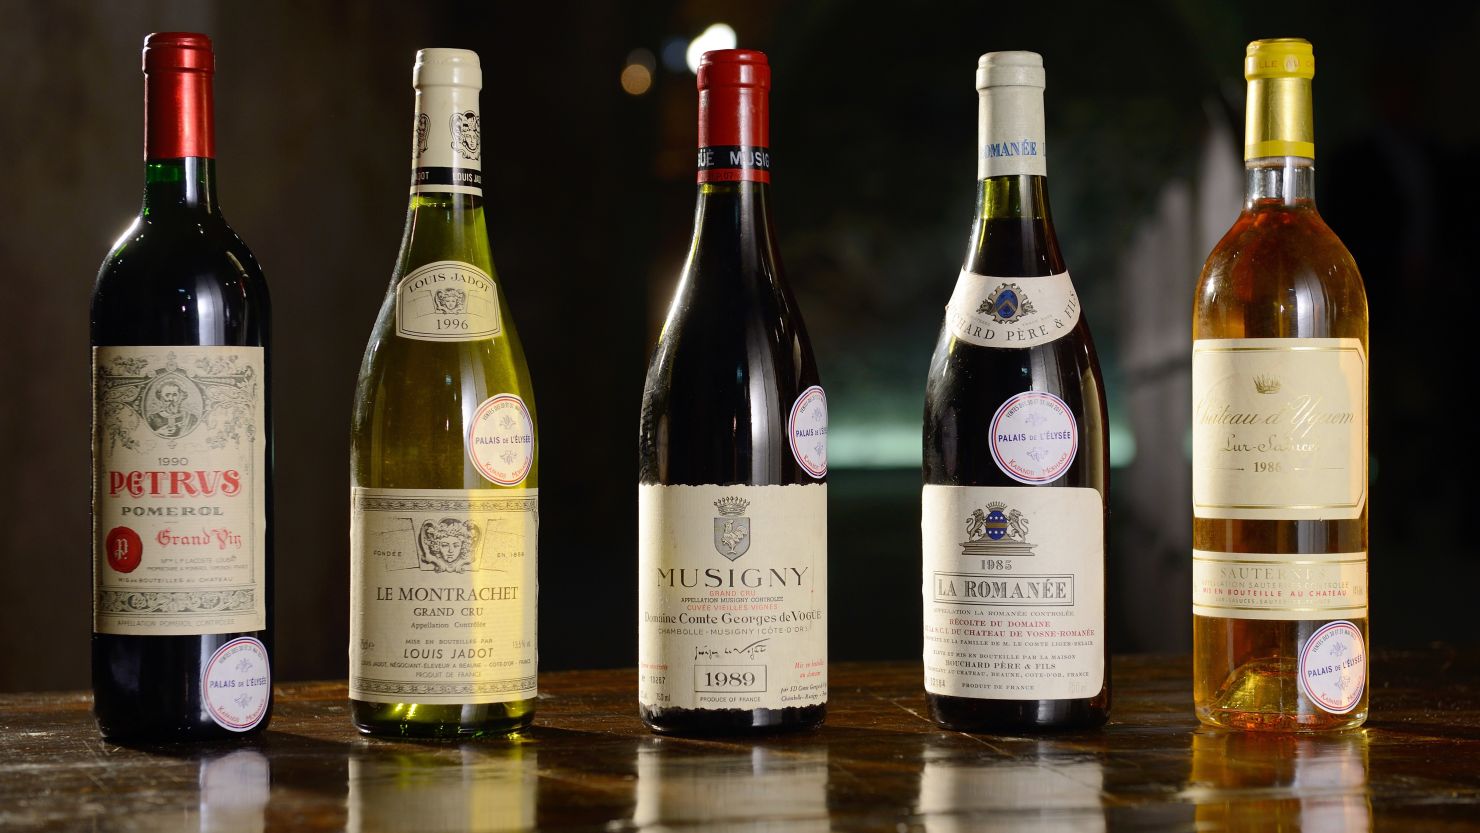 A selection of wine, including the bottles seen above, will be auctioned off by France's presidential palace.